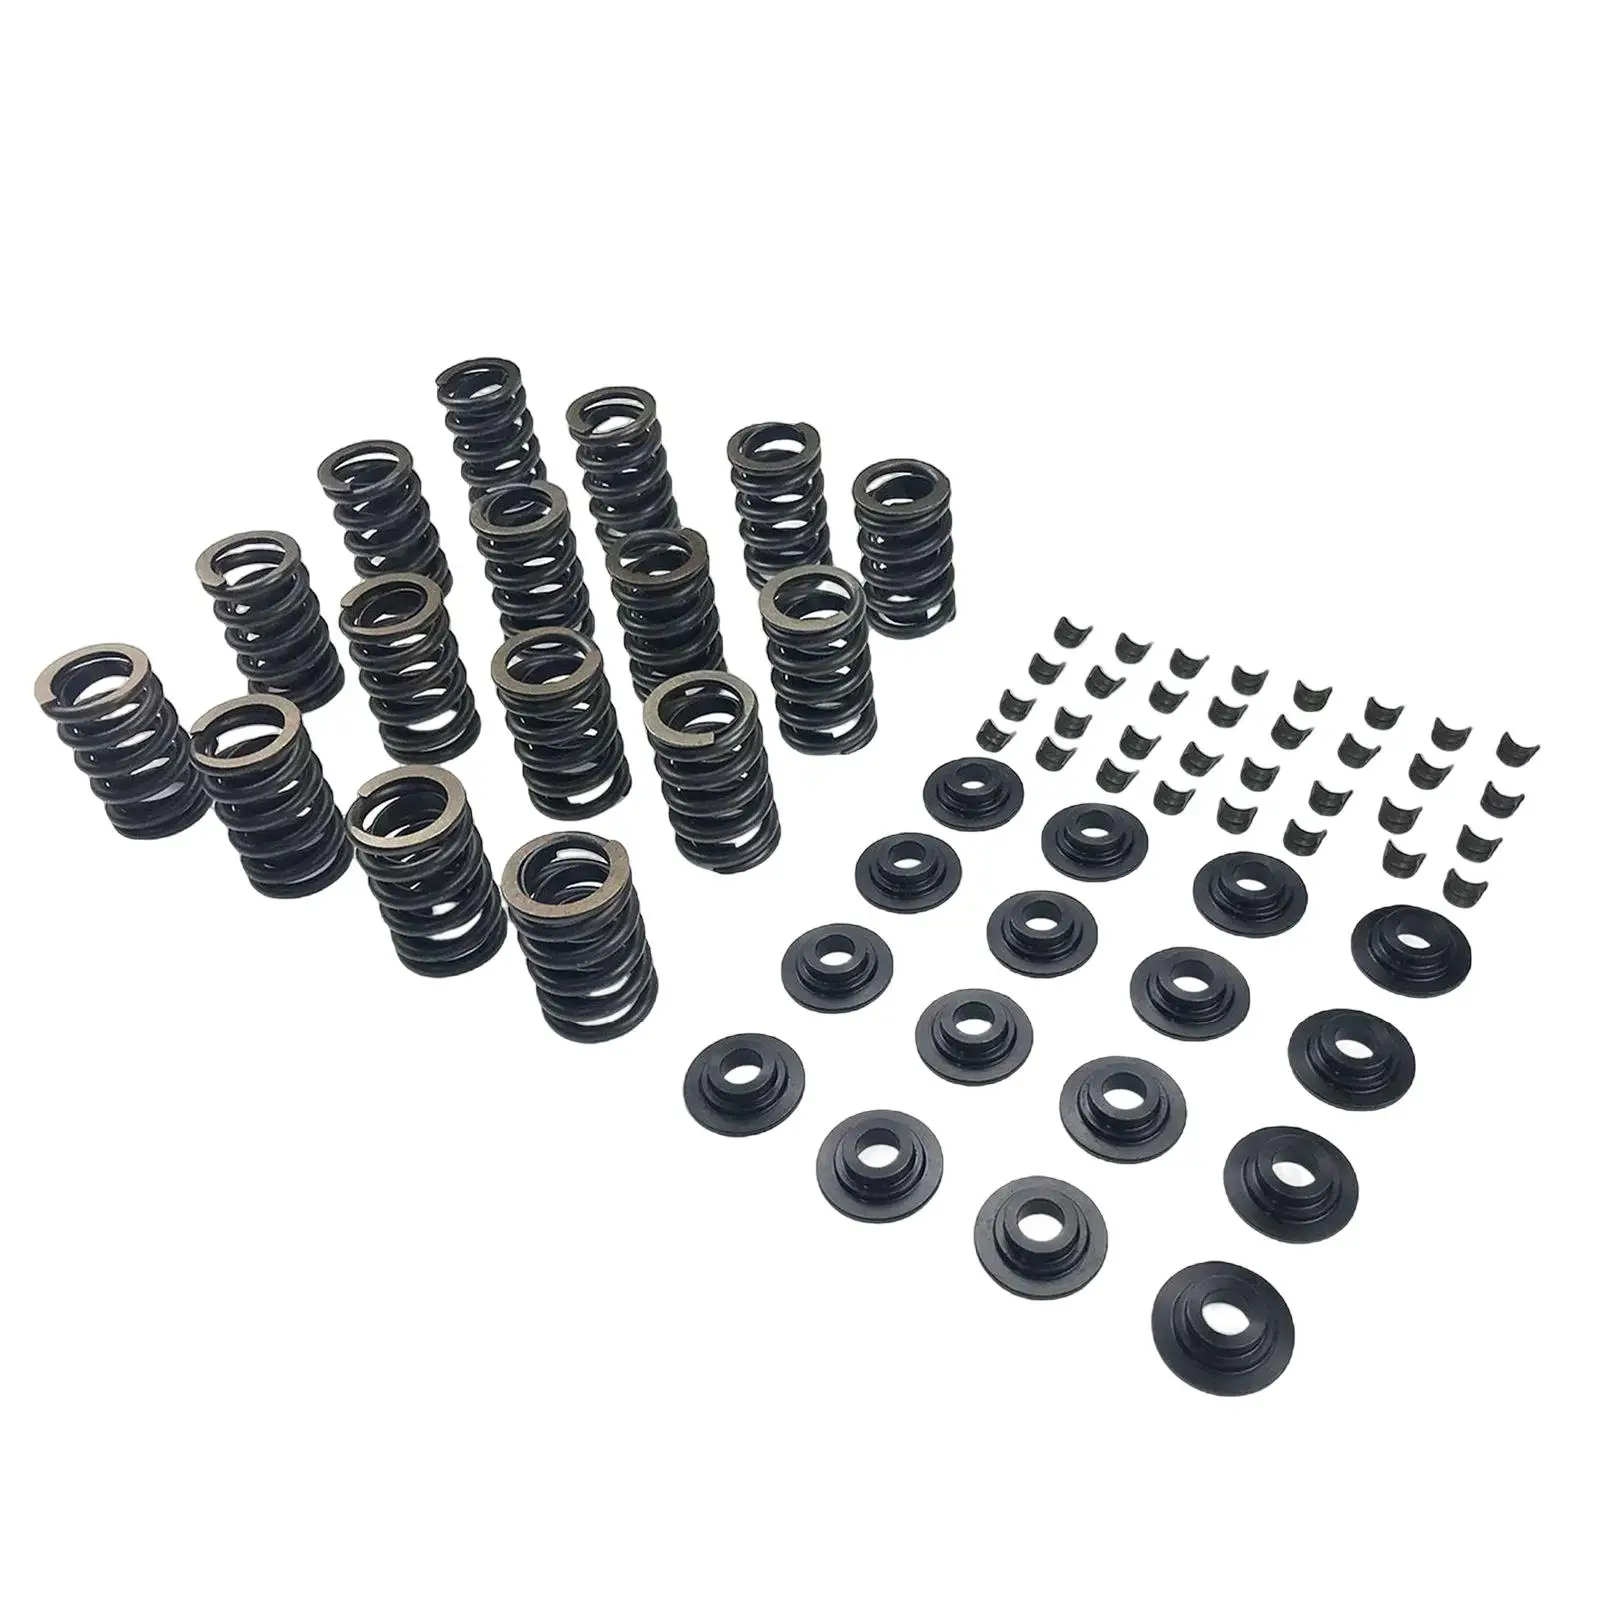 64x Valve Springs Kit with Steel Retainers HD Locks Fit for Chevy Sbc 327 350 400 Automobiles Components Professional Engines